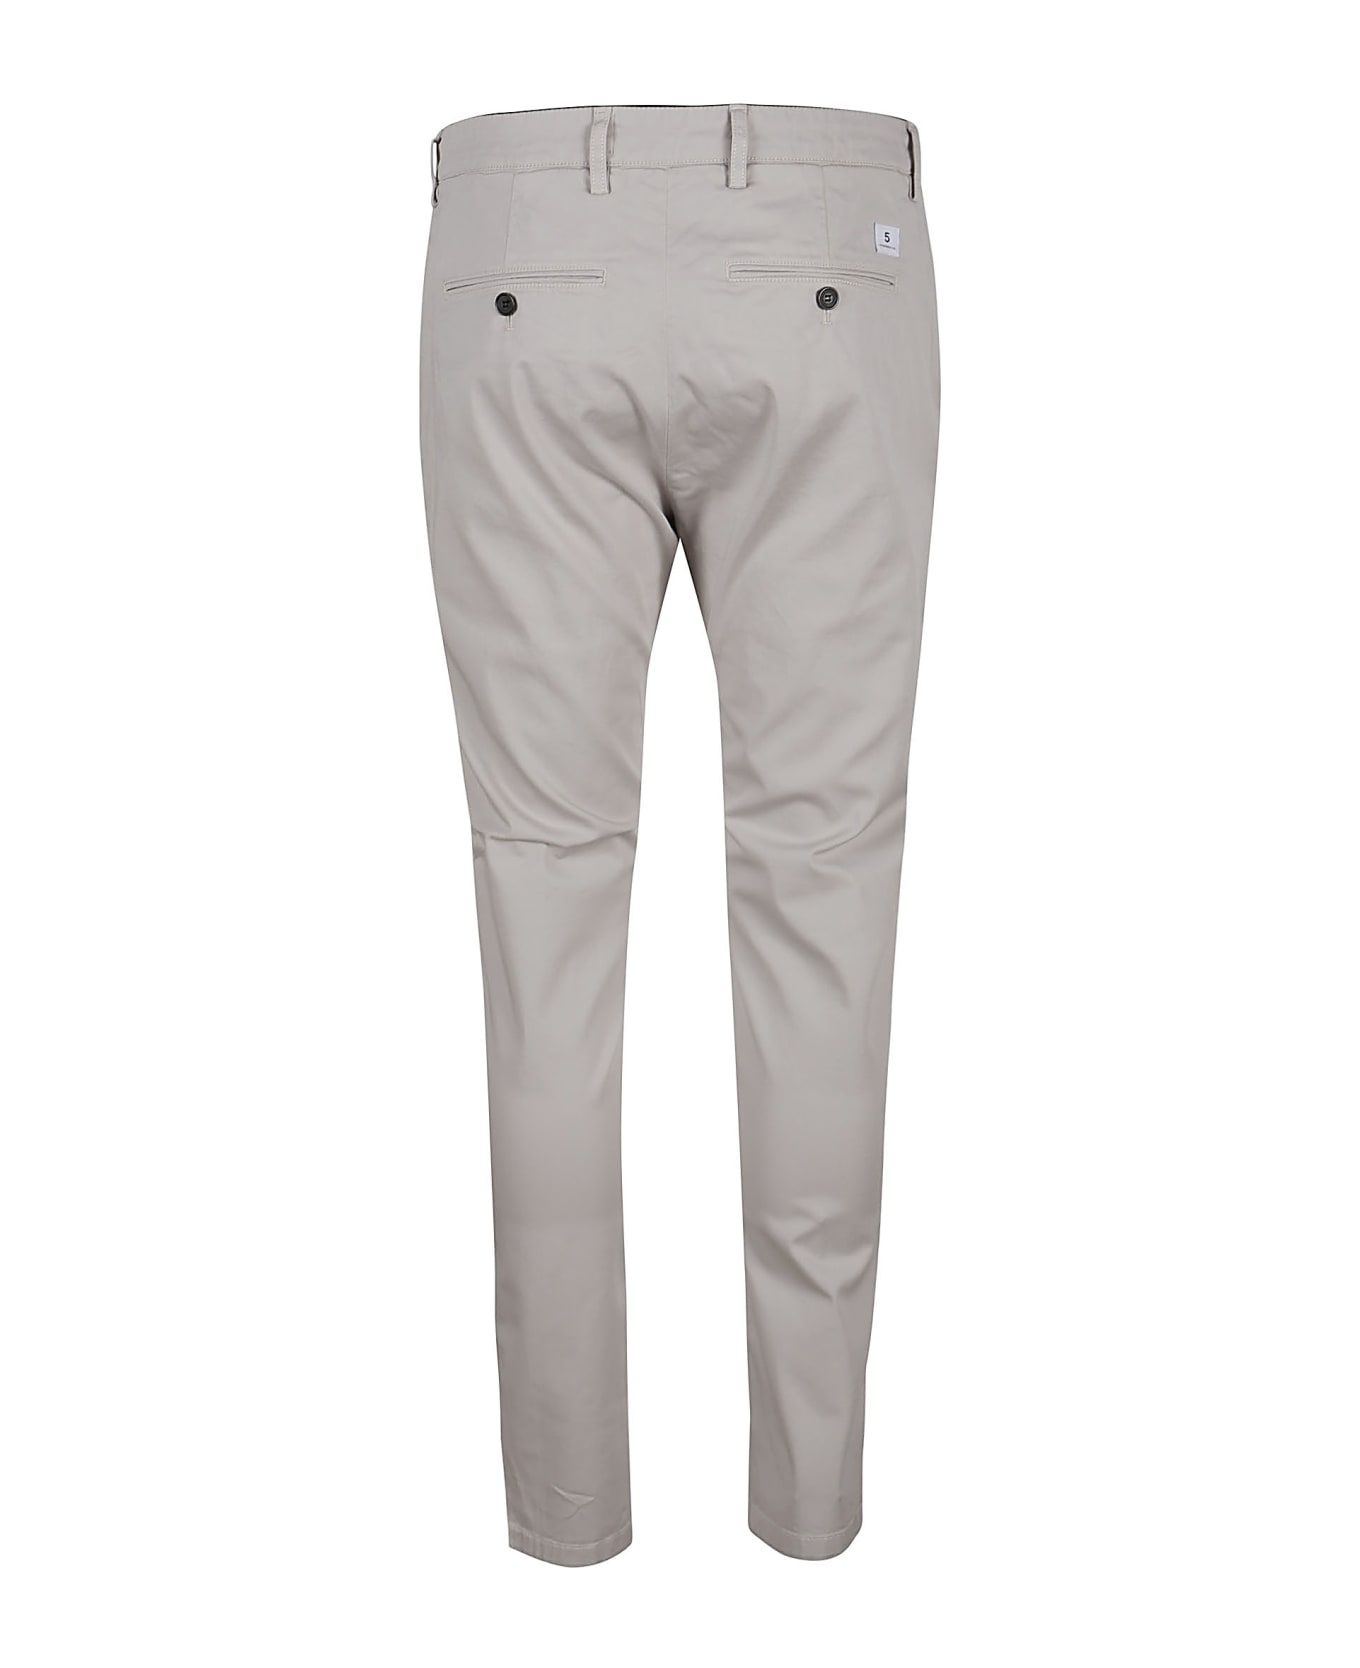 Department Five Mike Chinos Superslim Pant - Stucco ボトムス